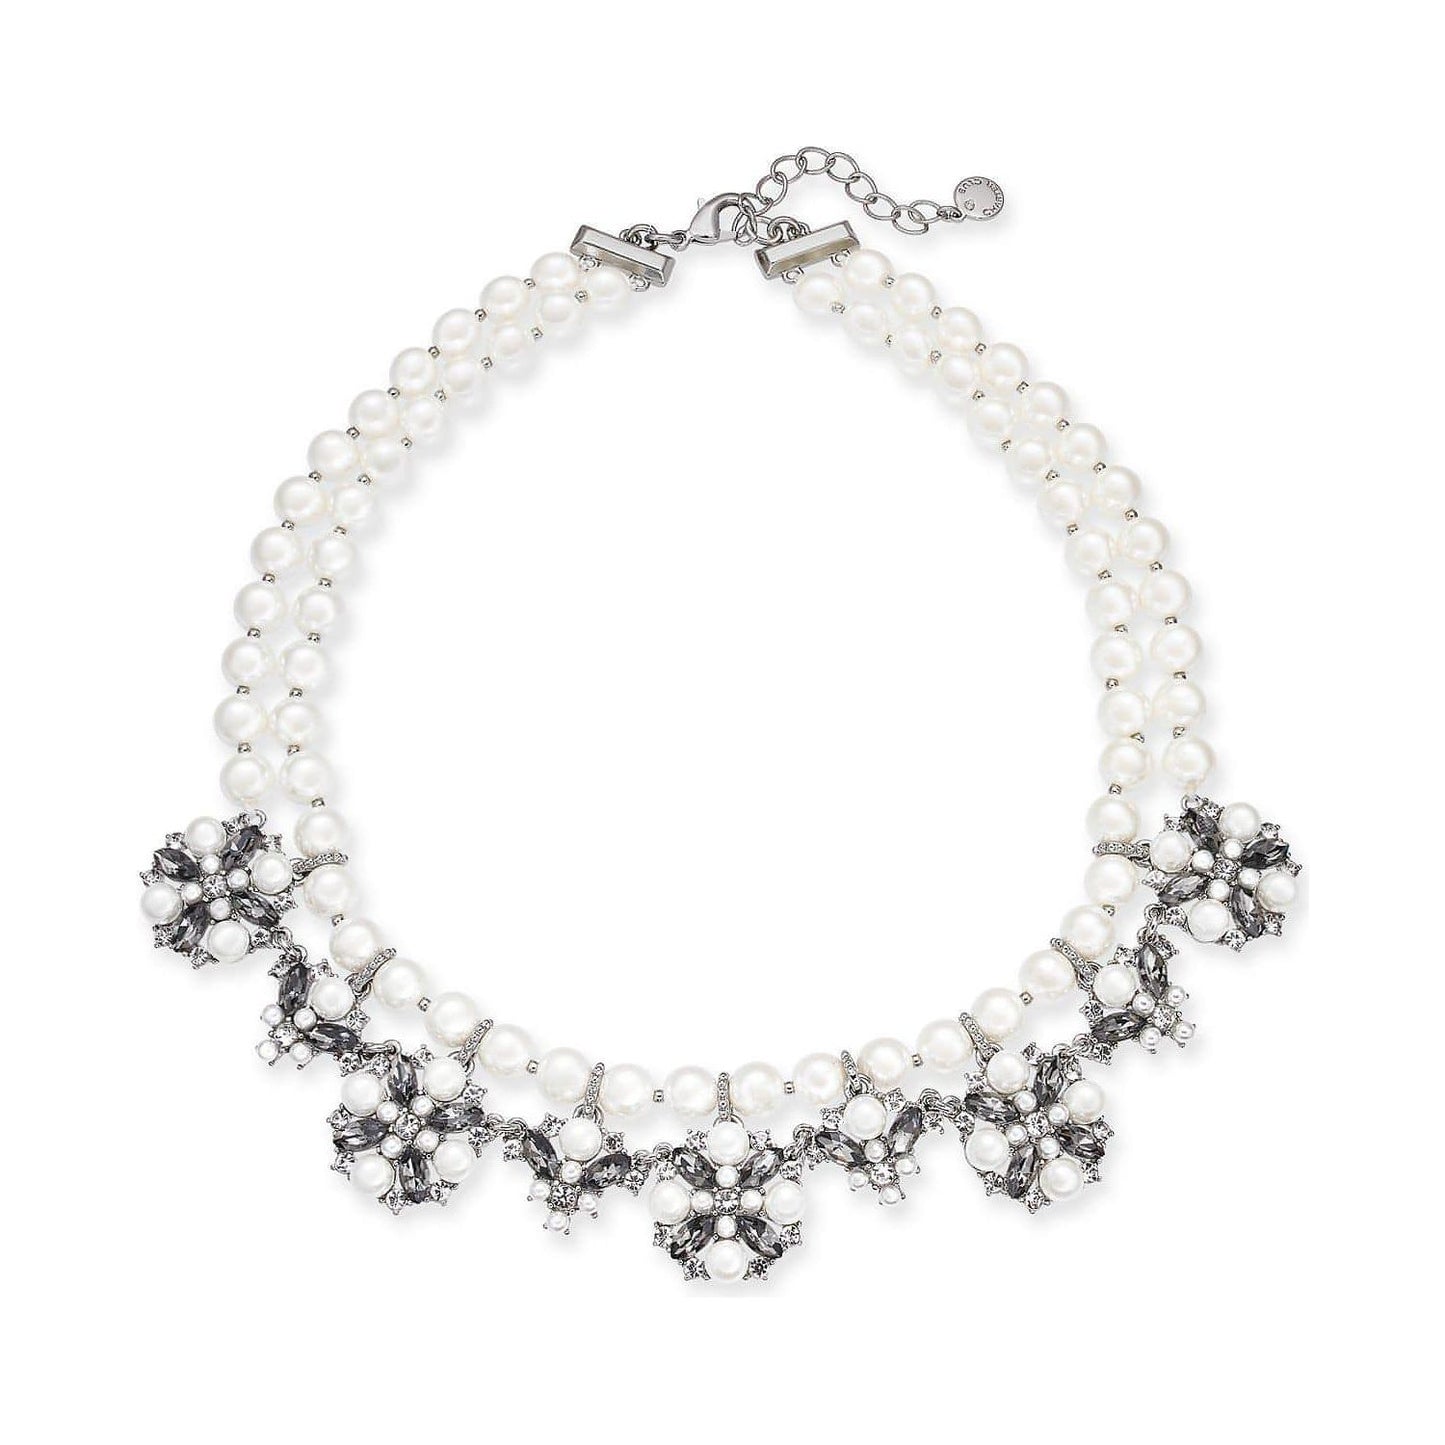 Silver-Tone Imitation Pearl, Crystal & Stone Double Row Collar Necklace - Brandat Outlet, Women's Handbags Outlet ,Handbags Online Outlet | Brands Outlet | Brandat Outlet | Designer Handbags Online |